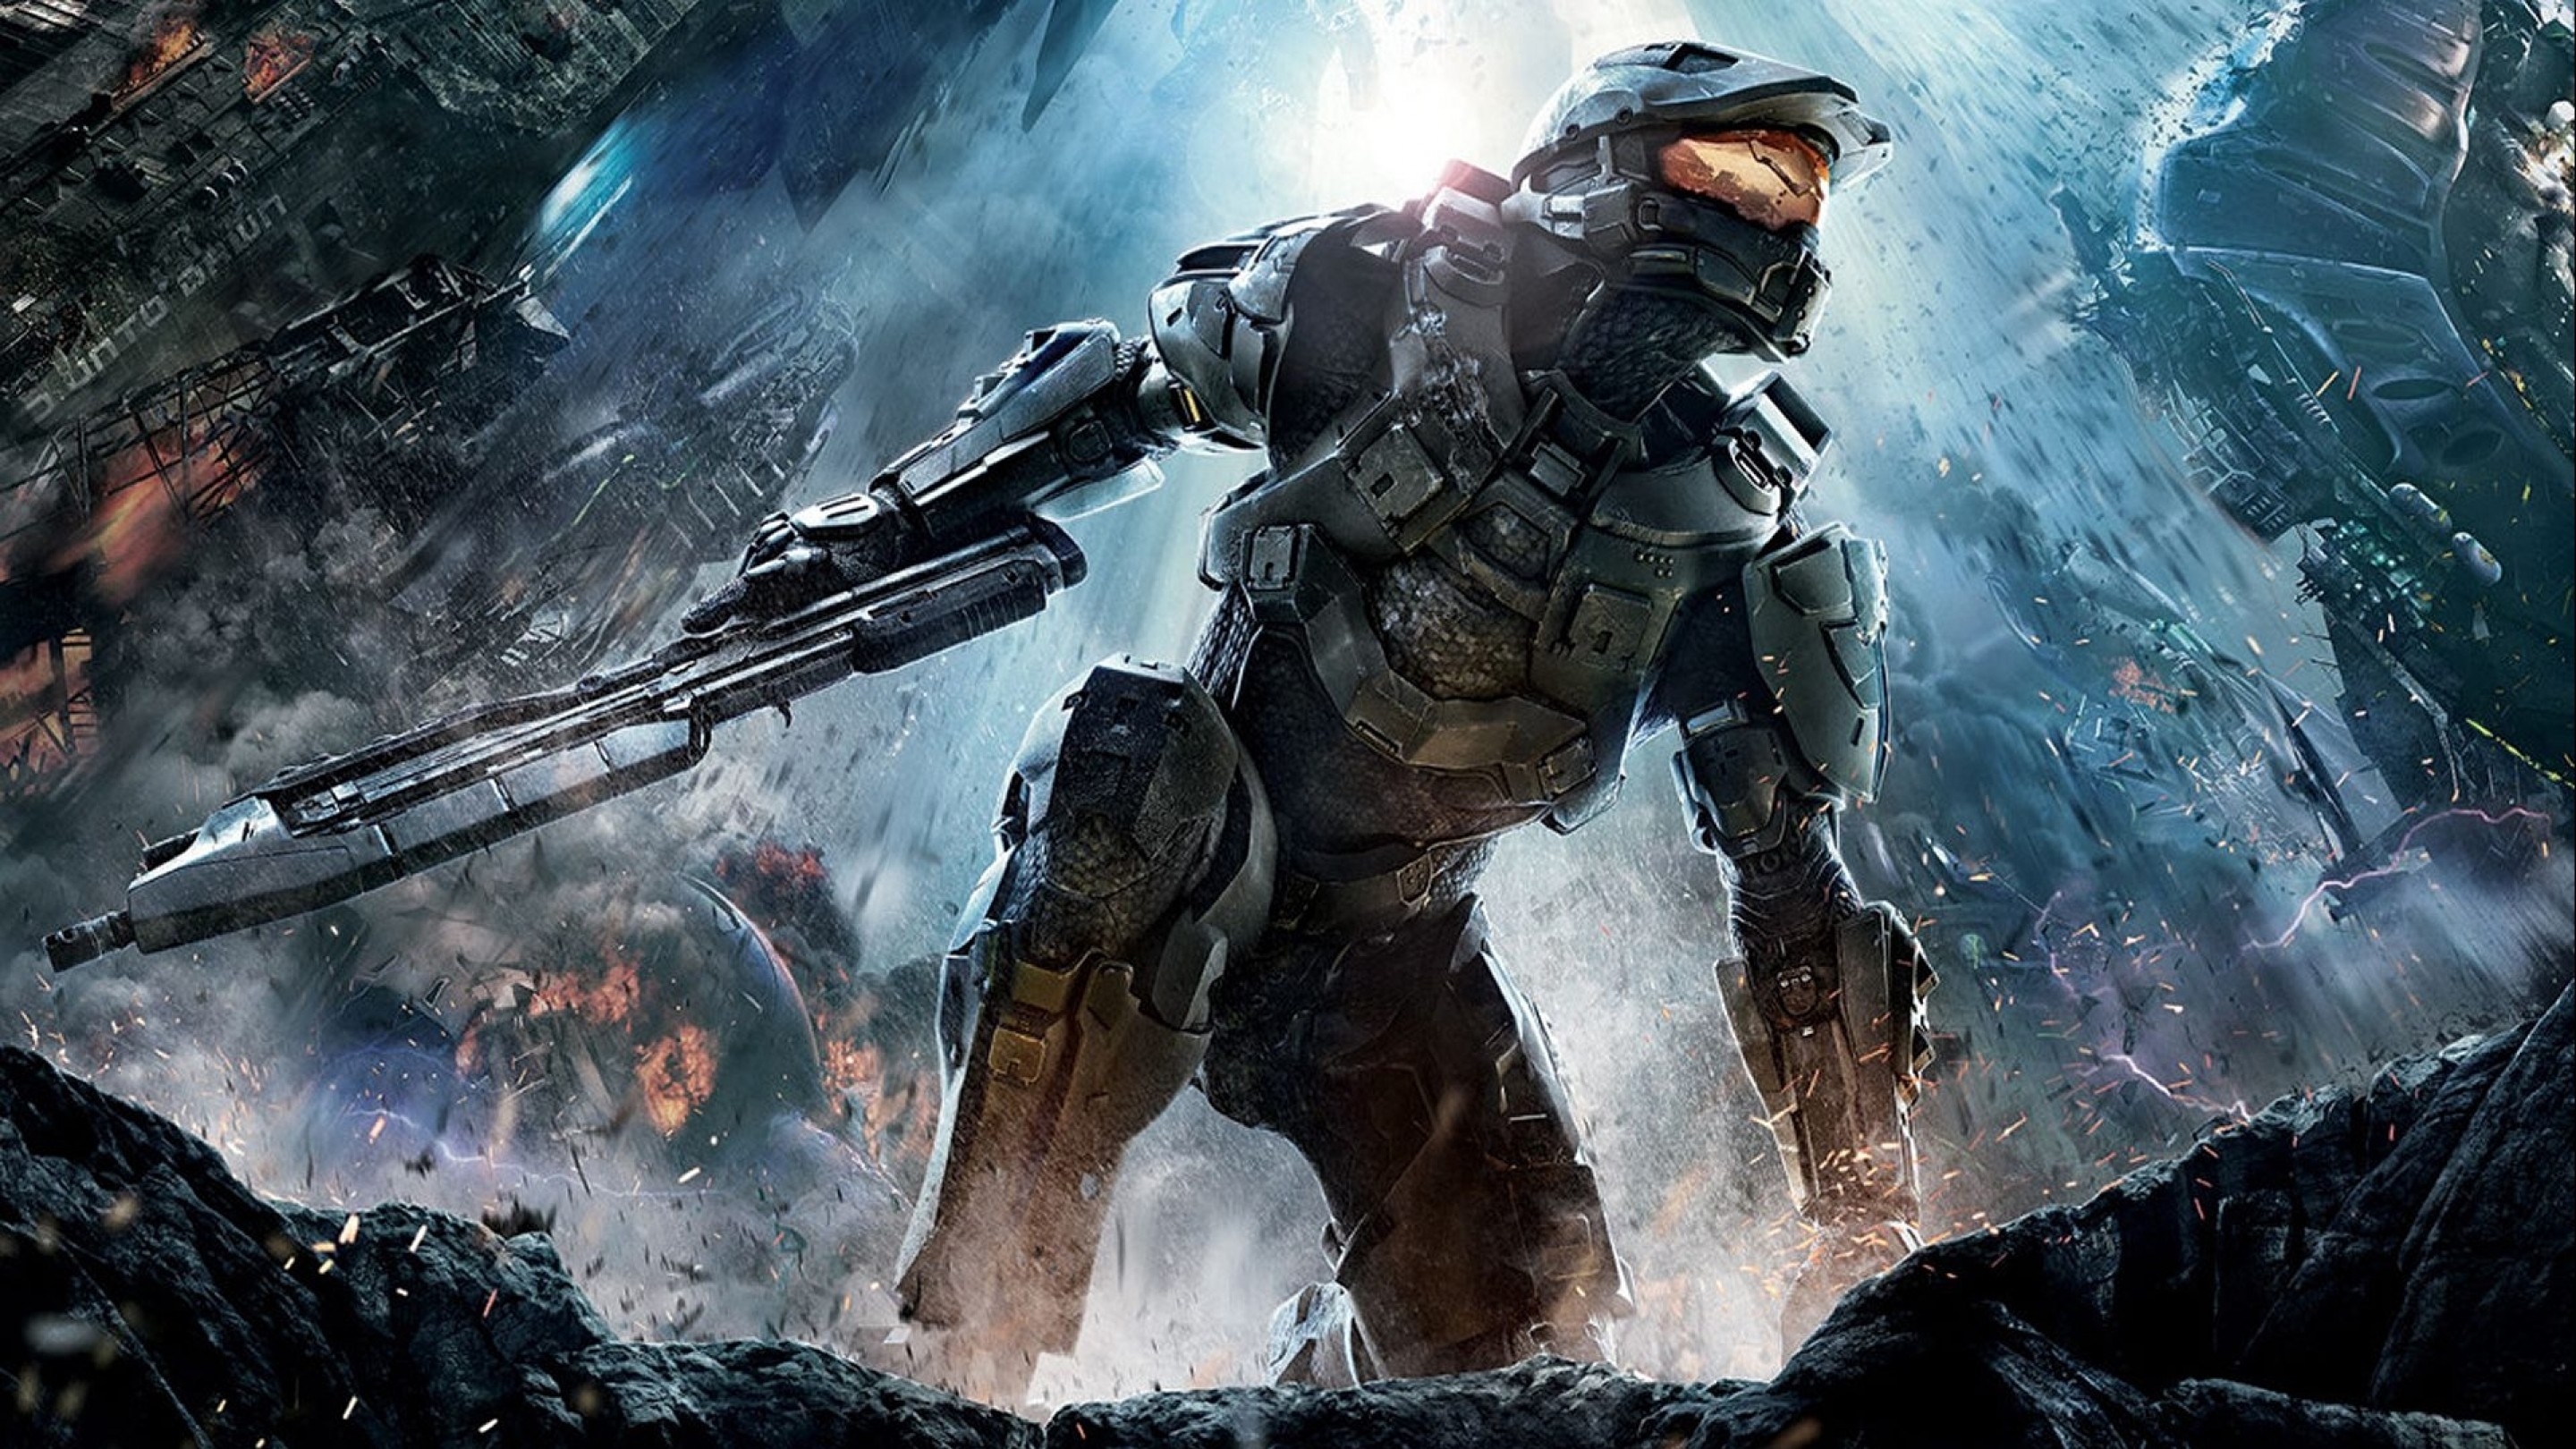 General 2880x1620 Halo (game) Halo: The Master Chief Collection gun Halo 4 low-angle video games PC gaming weapon video game men science fiction video game characters Master Chief (Halo) Futuristic Weapons video game art